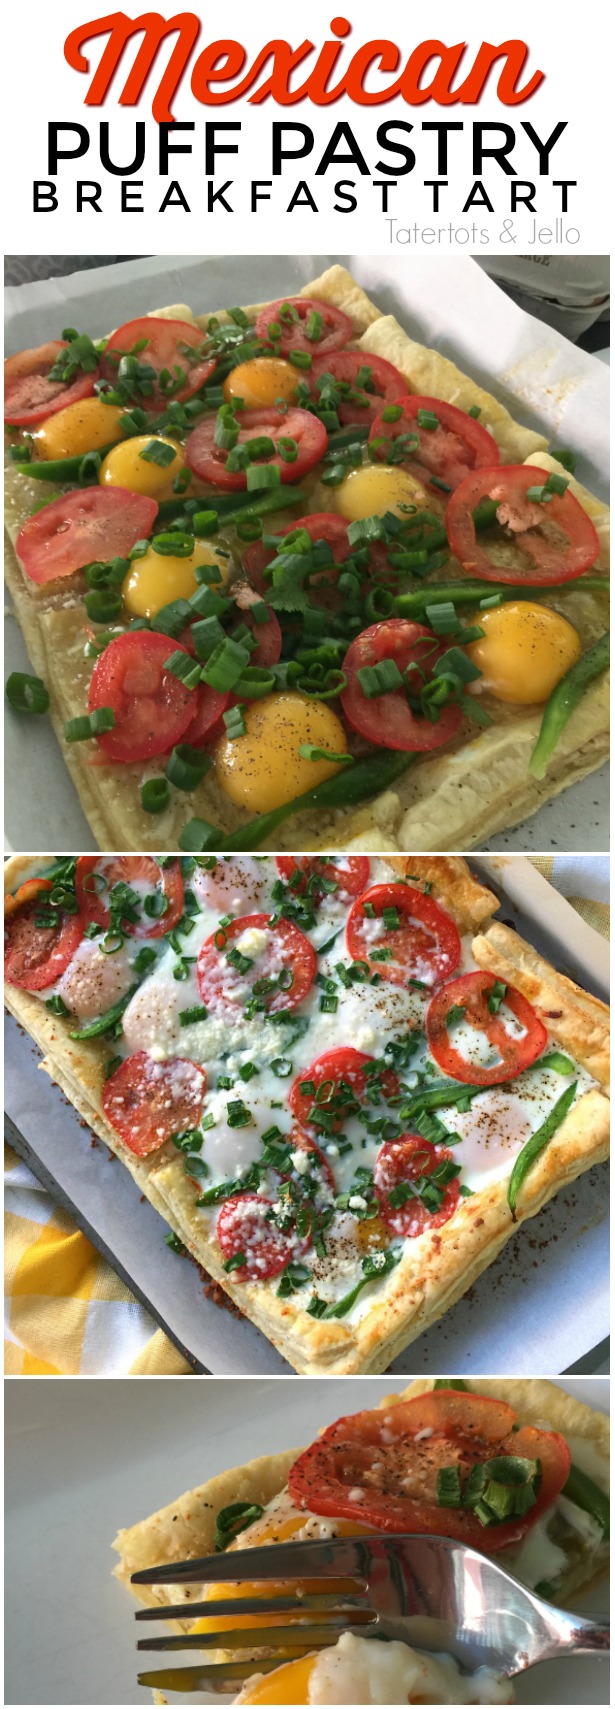 Southwestern puff pastry breakfast tart. Make this gorgeous tart in less than half an hour. Perfect for brunch! 